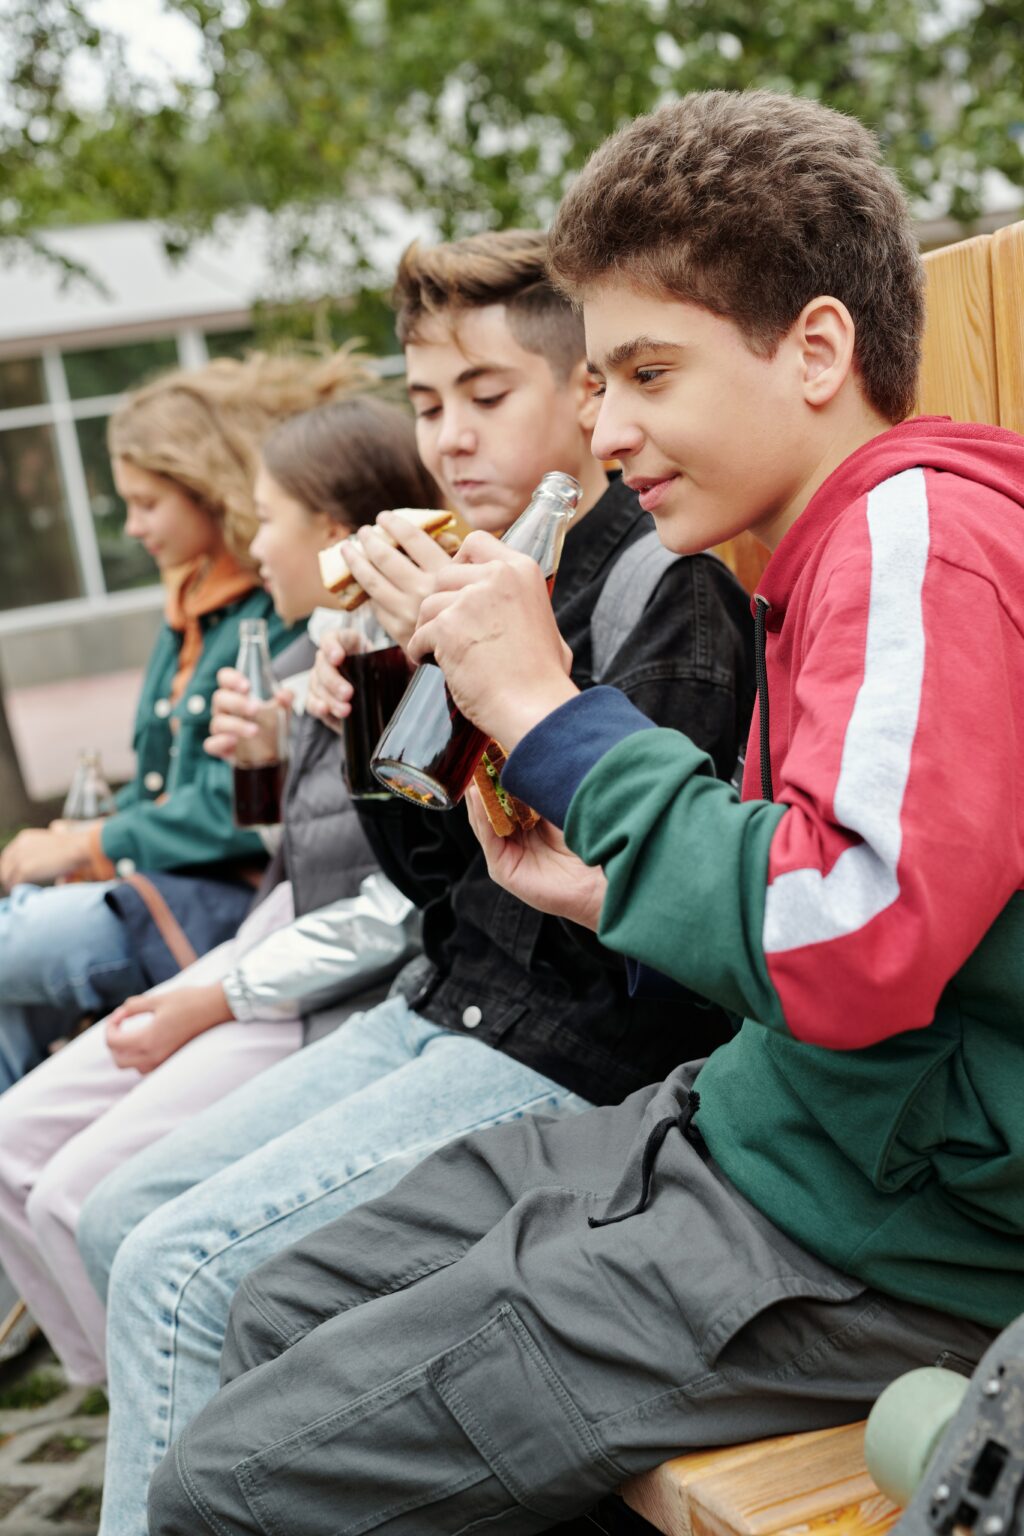 side view of young tweens enjoying their lunches together while drink soda pop